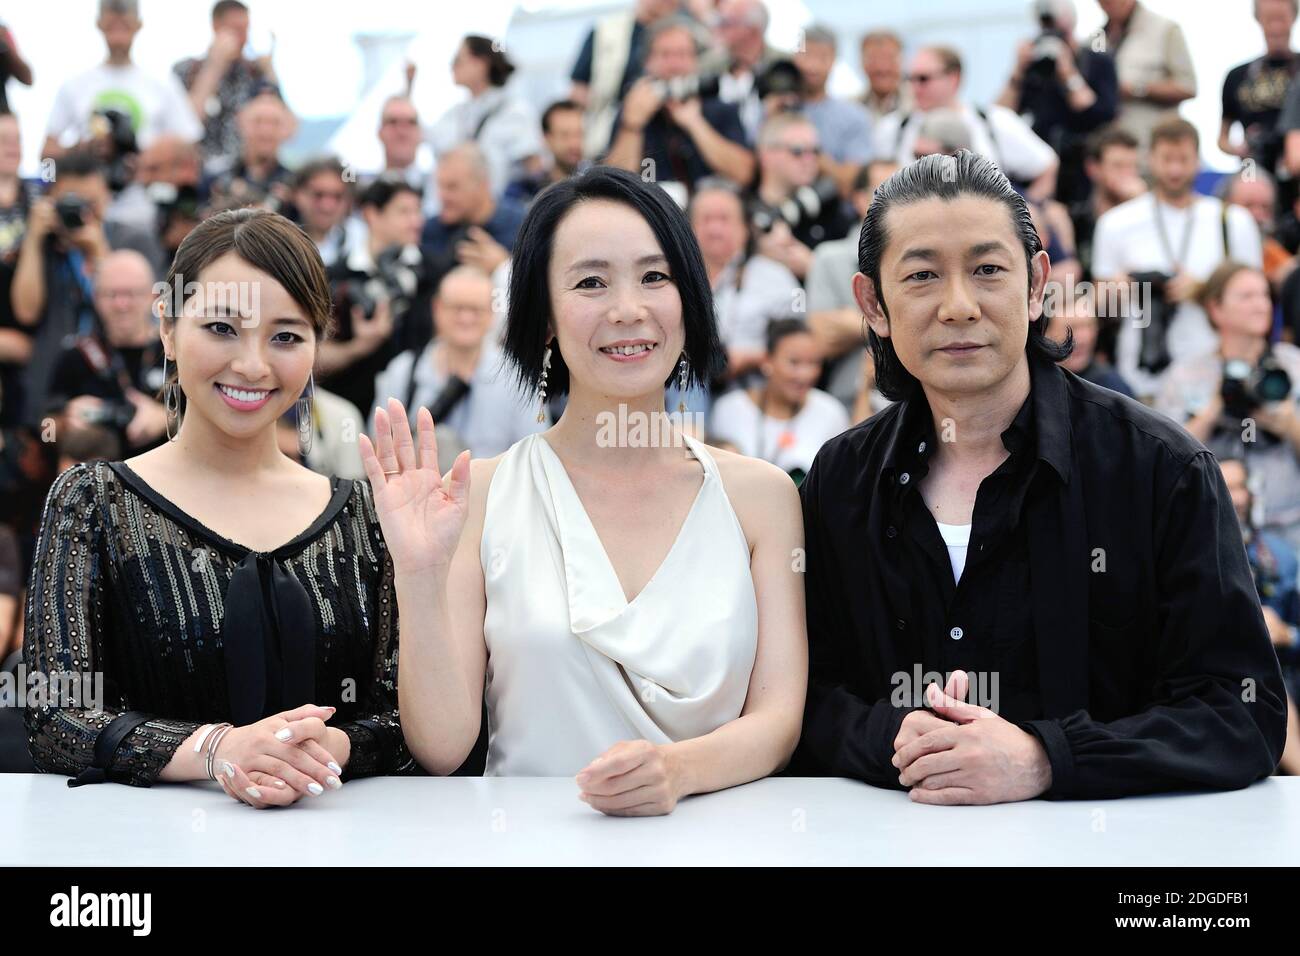 Ayame Misaki, Naomi Kawase and Masatoshi Nagase attending the Radiance photocall as part of the 70th Cannes Film Festival in Cannes, France on May 23, 2017. Photo by Aurore Marechal/ABACAPRESS.COM Stock Photo